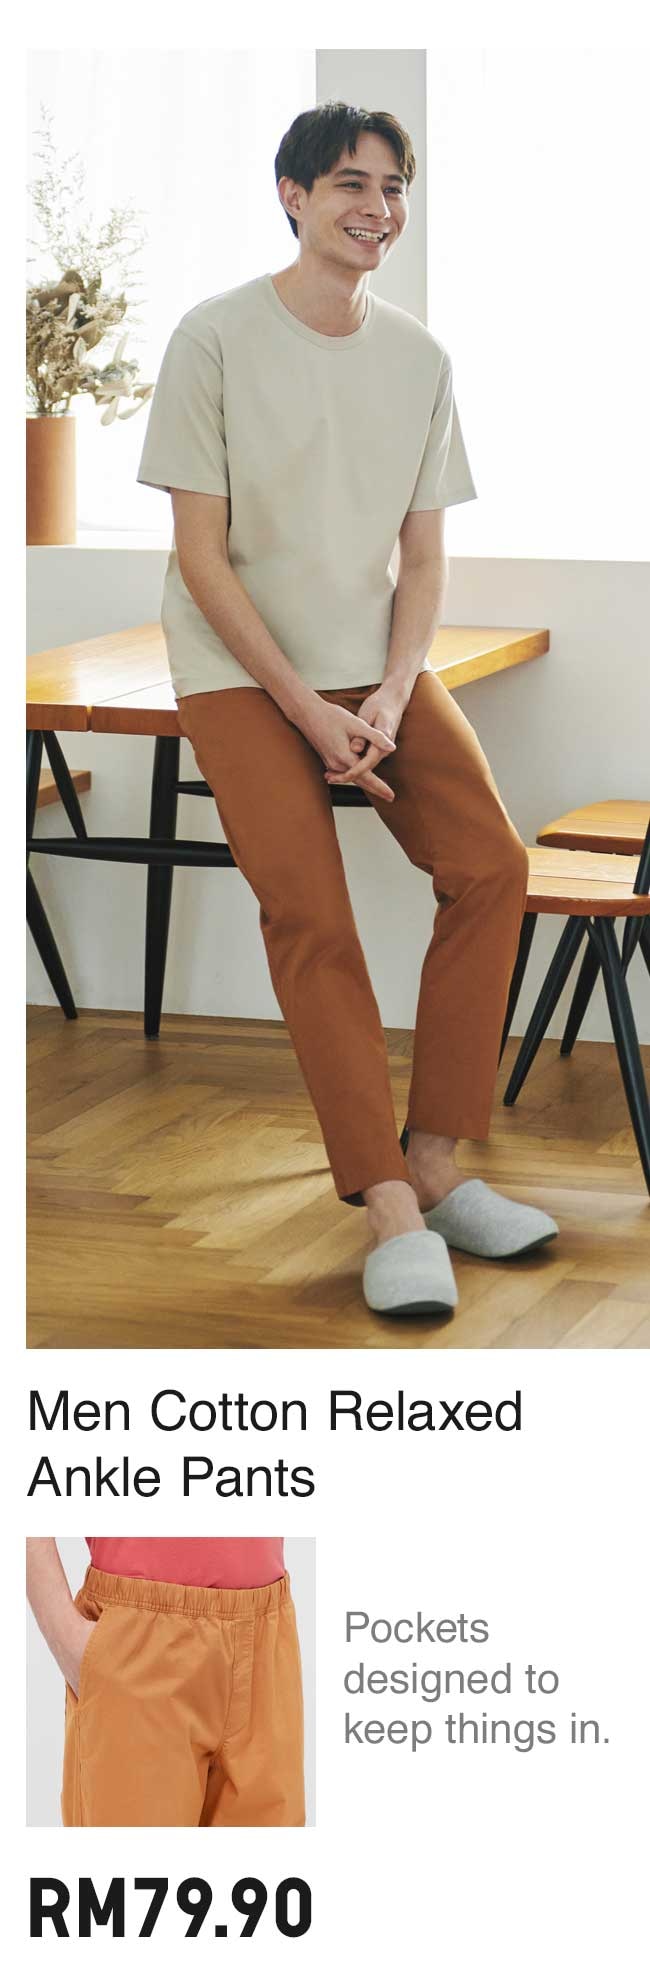 MEN COTTON RELAXED ANKLE PANTS